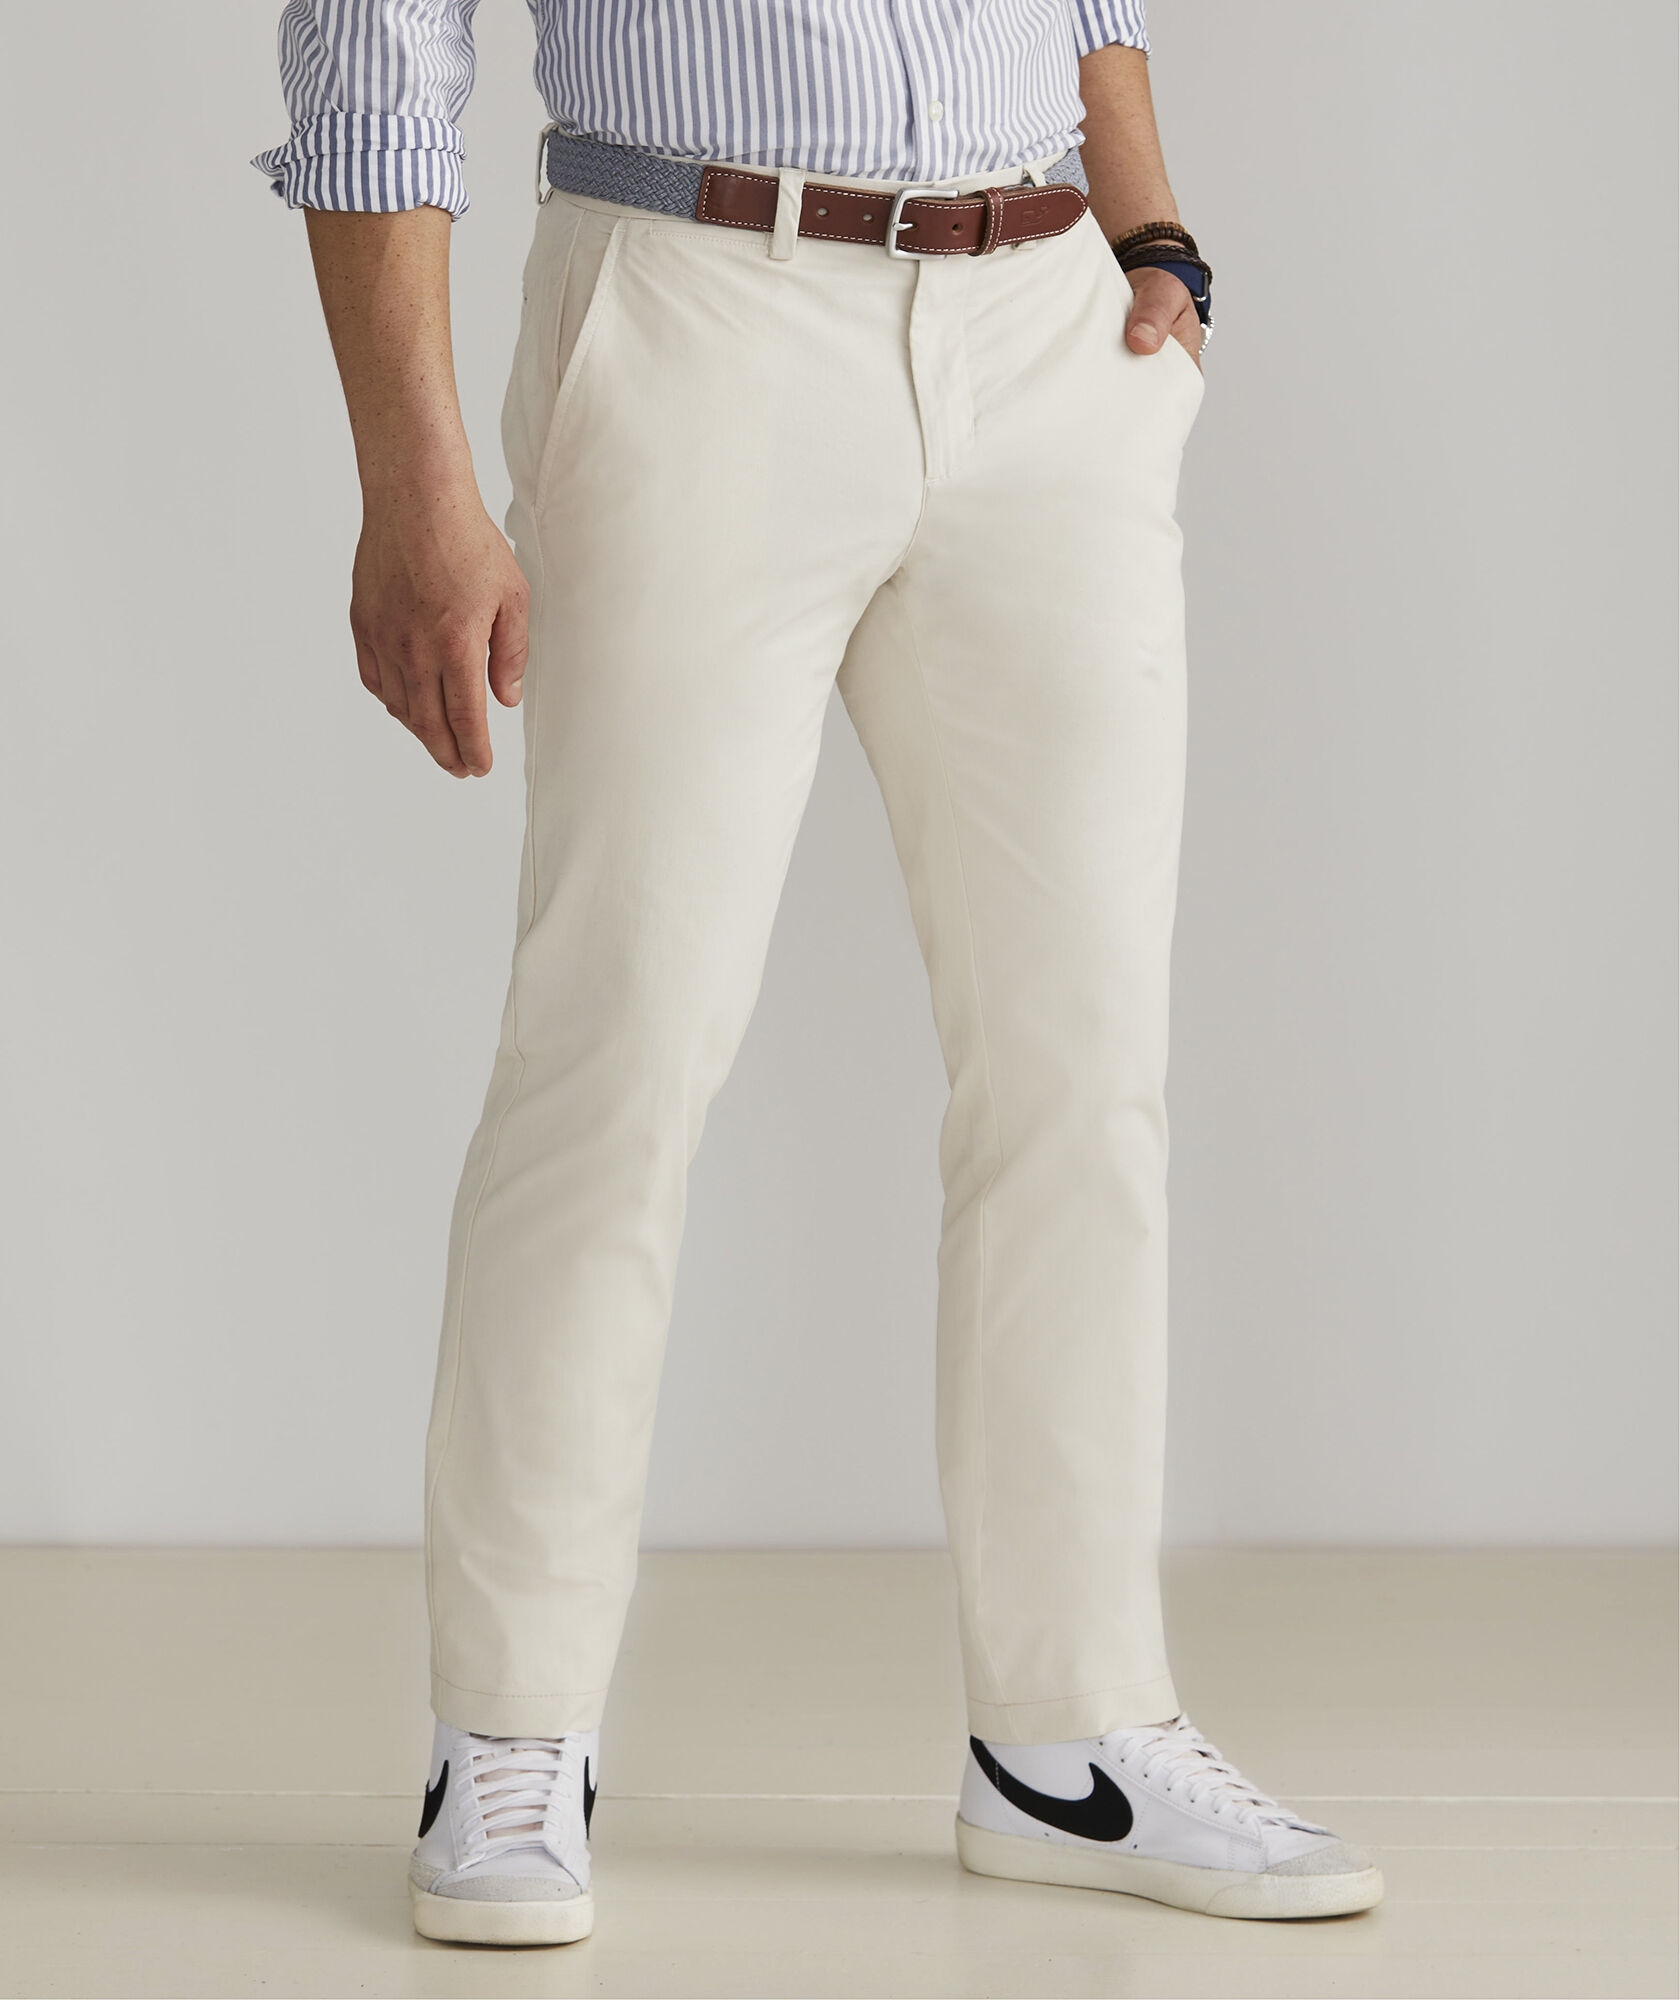 Buy Trousers for Men  Branded Casual Trousers by Rare Rabbit